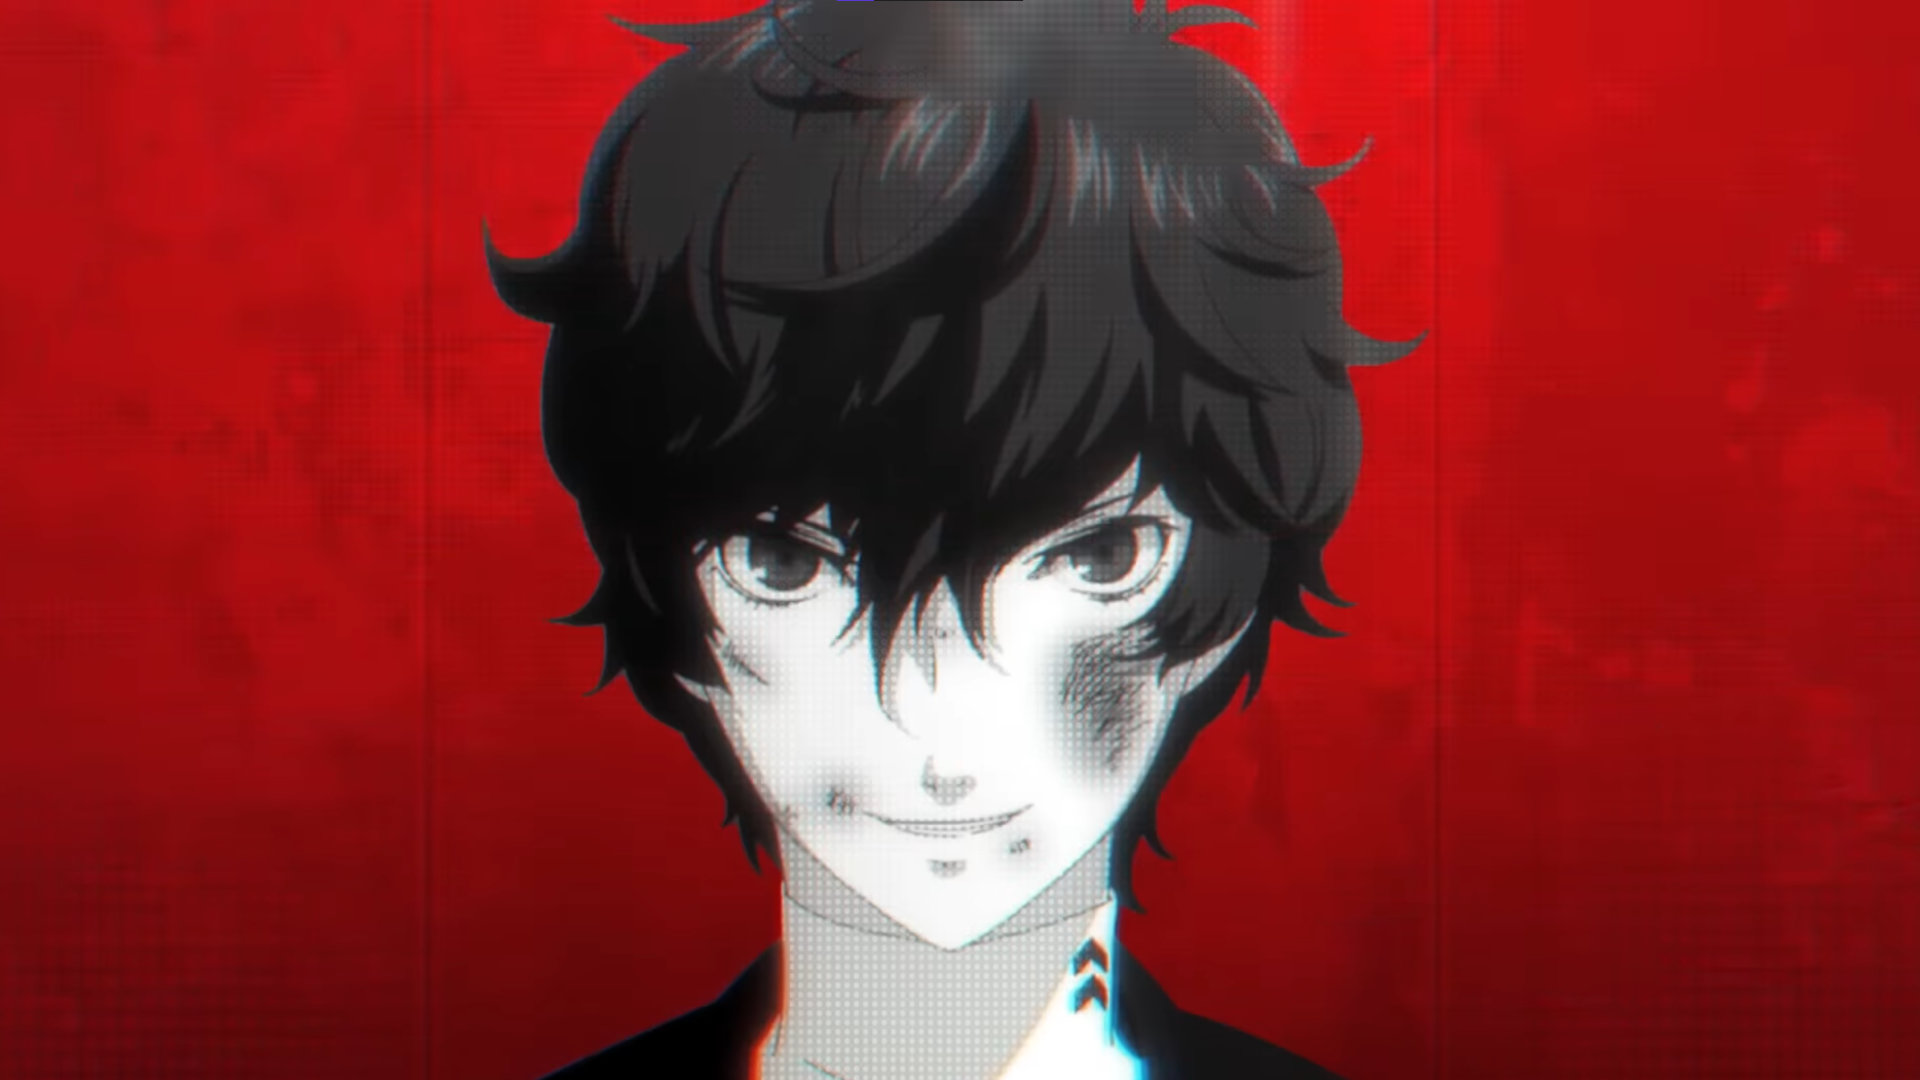 Persona 5 Royal system requirements – Steam Deck verified